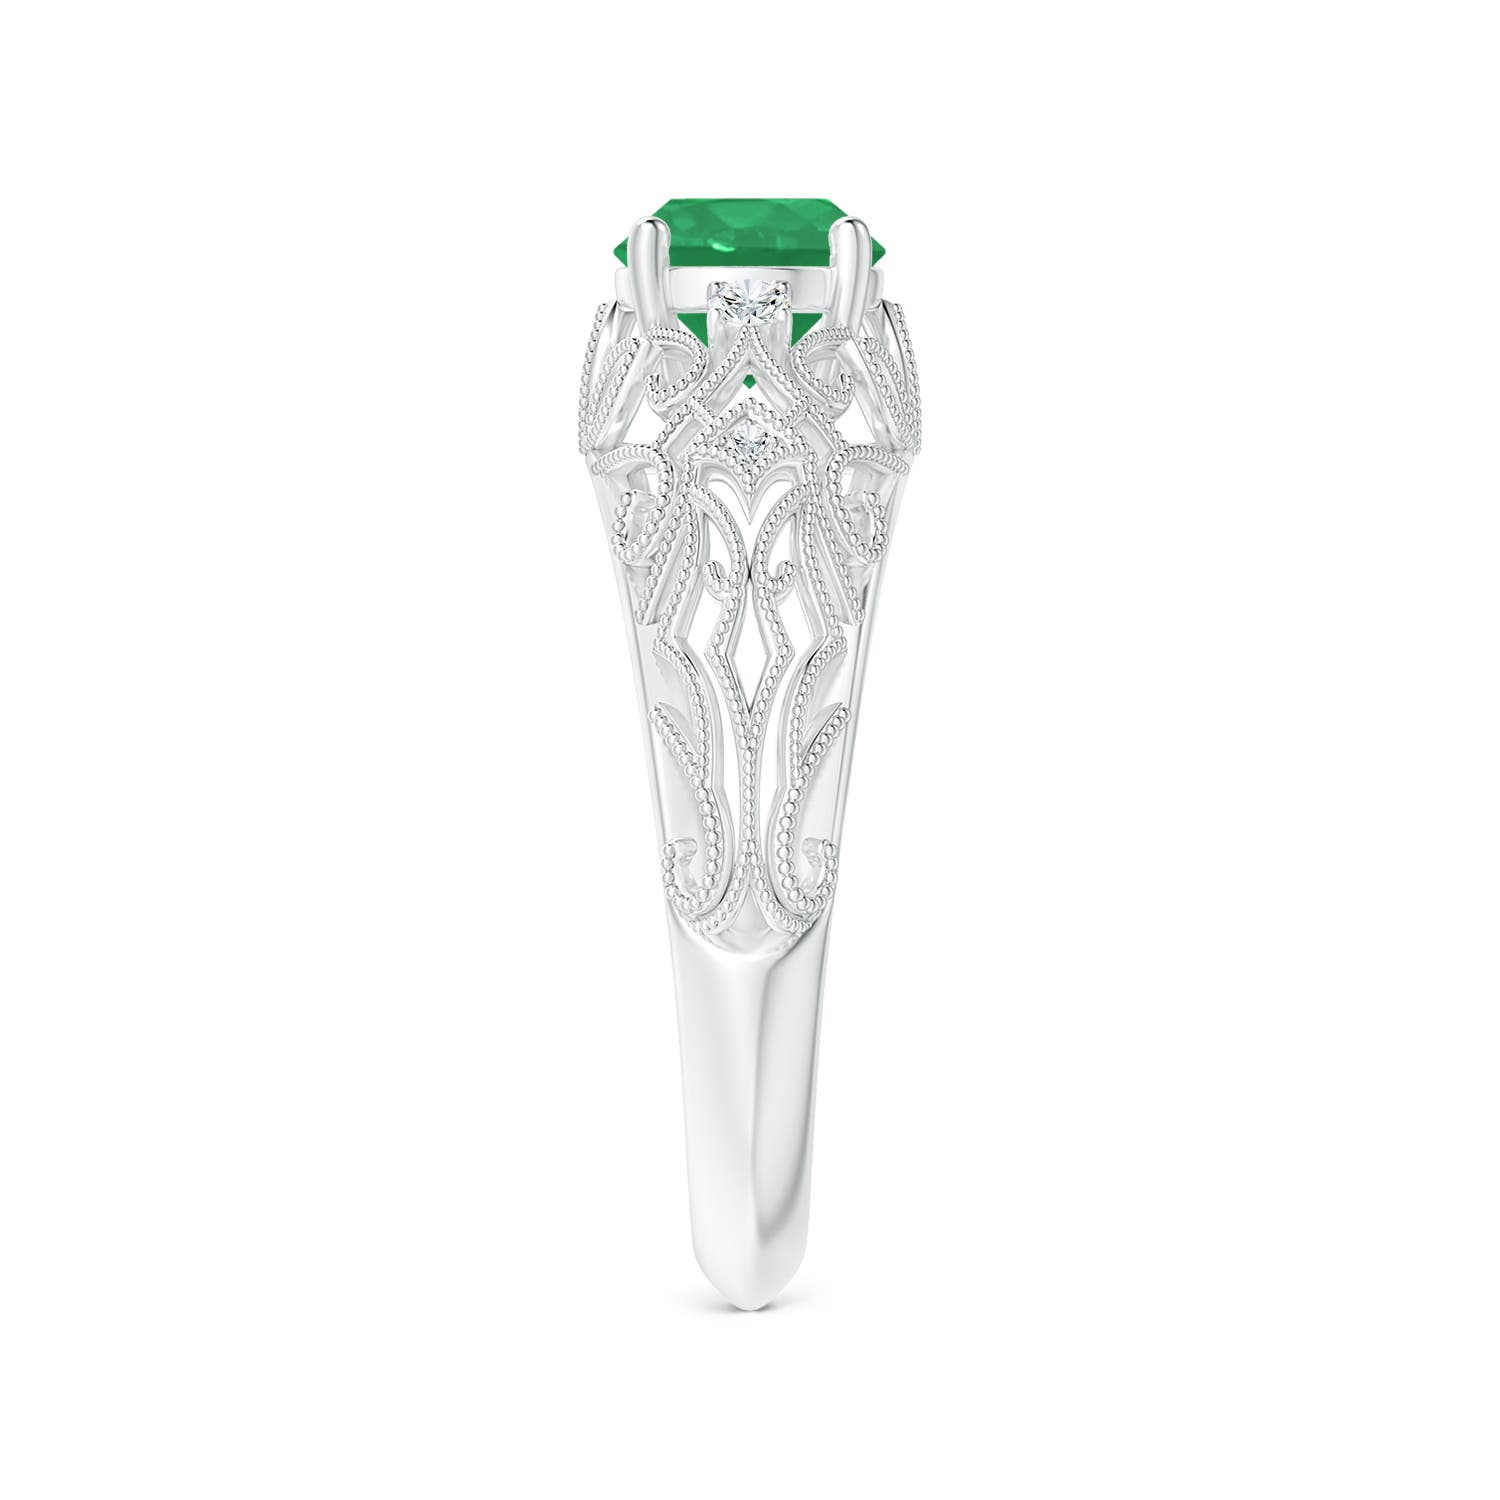 A - Emerald / 0.82 CT / 14 KT White Gold